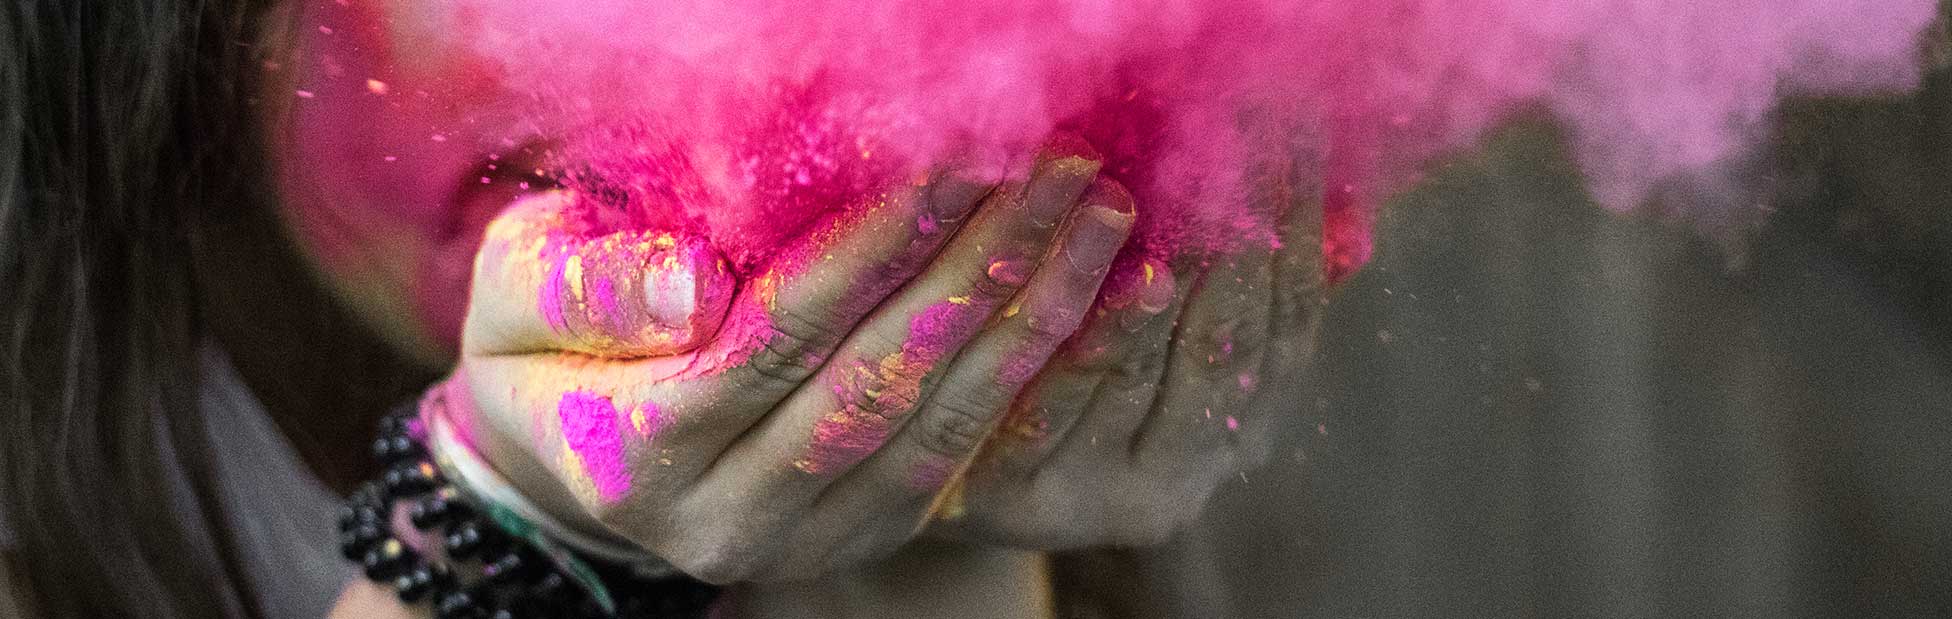 woman with long nails holding colour powder blowing it to make a cloud